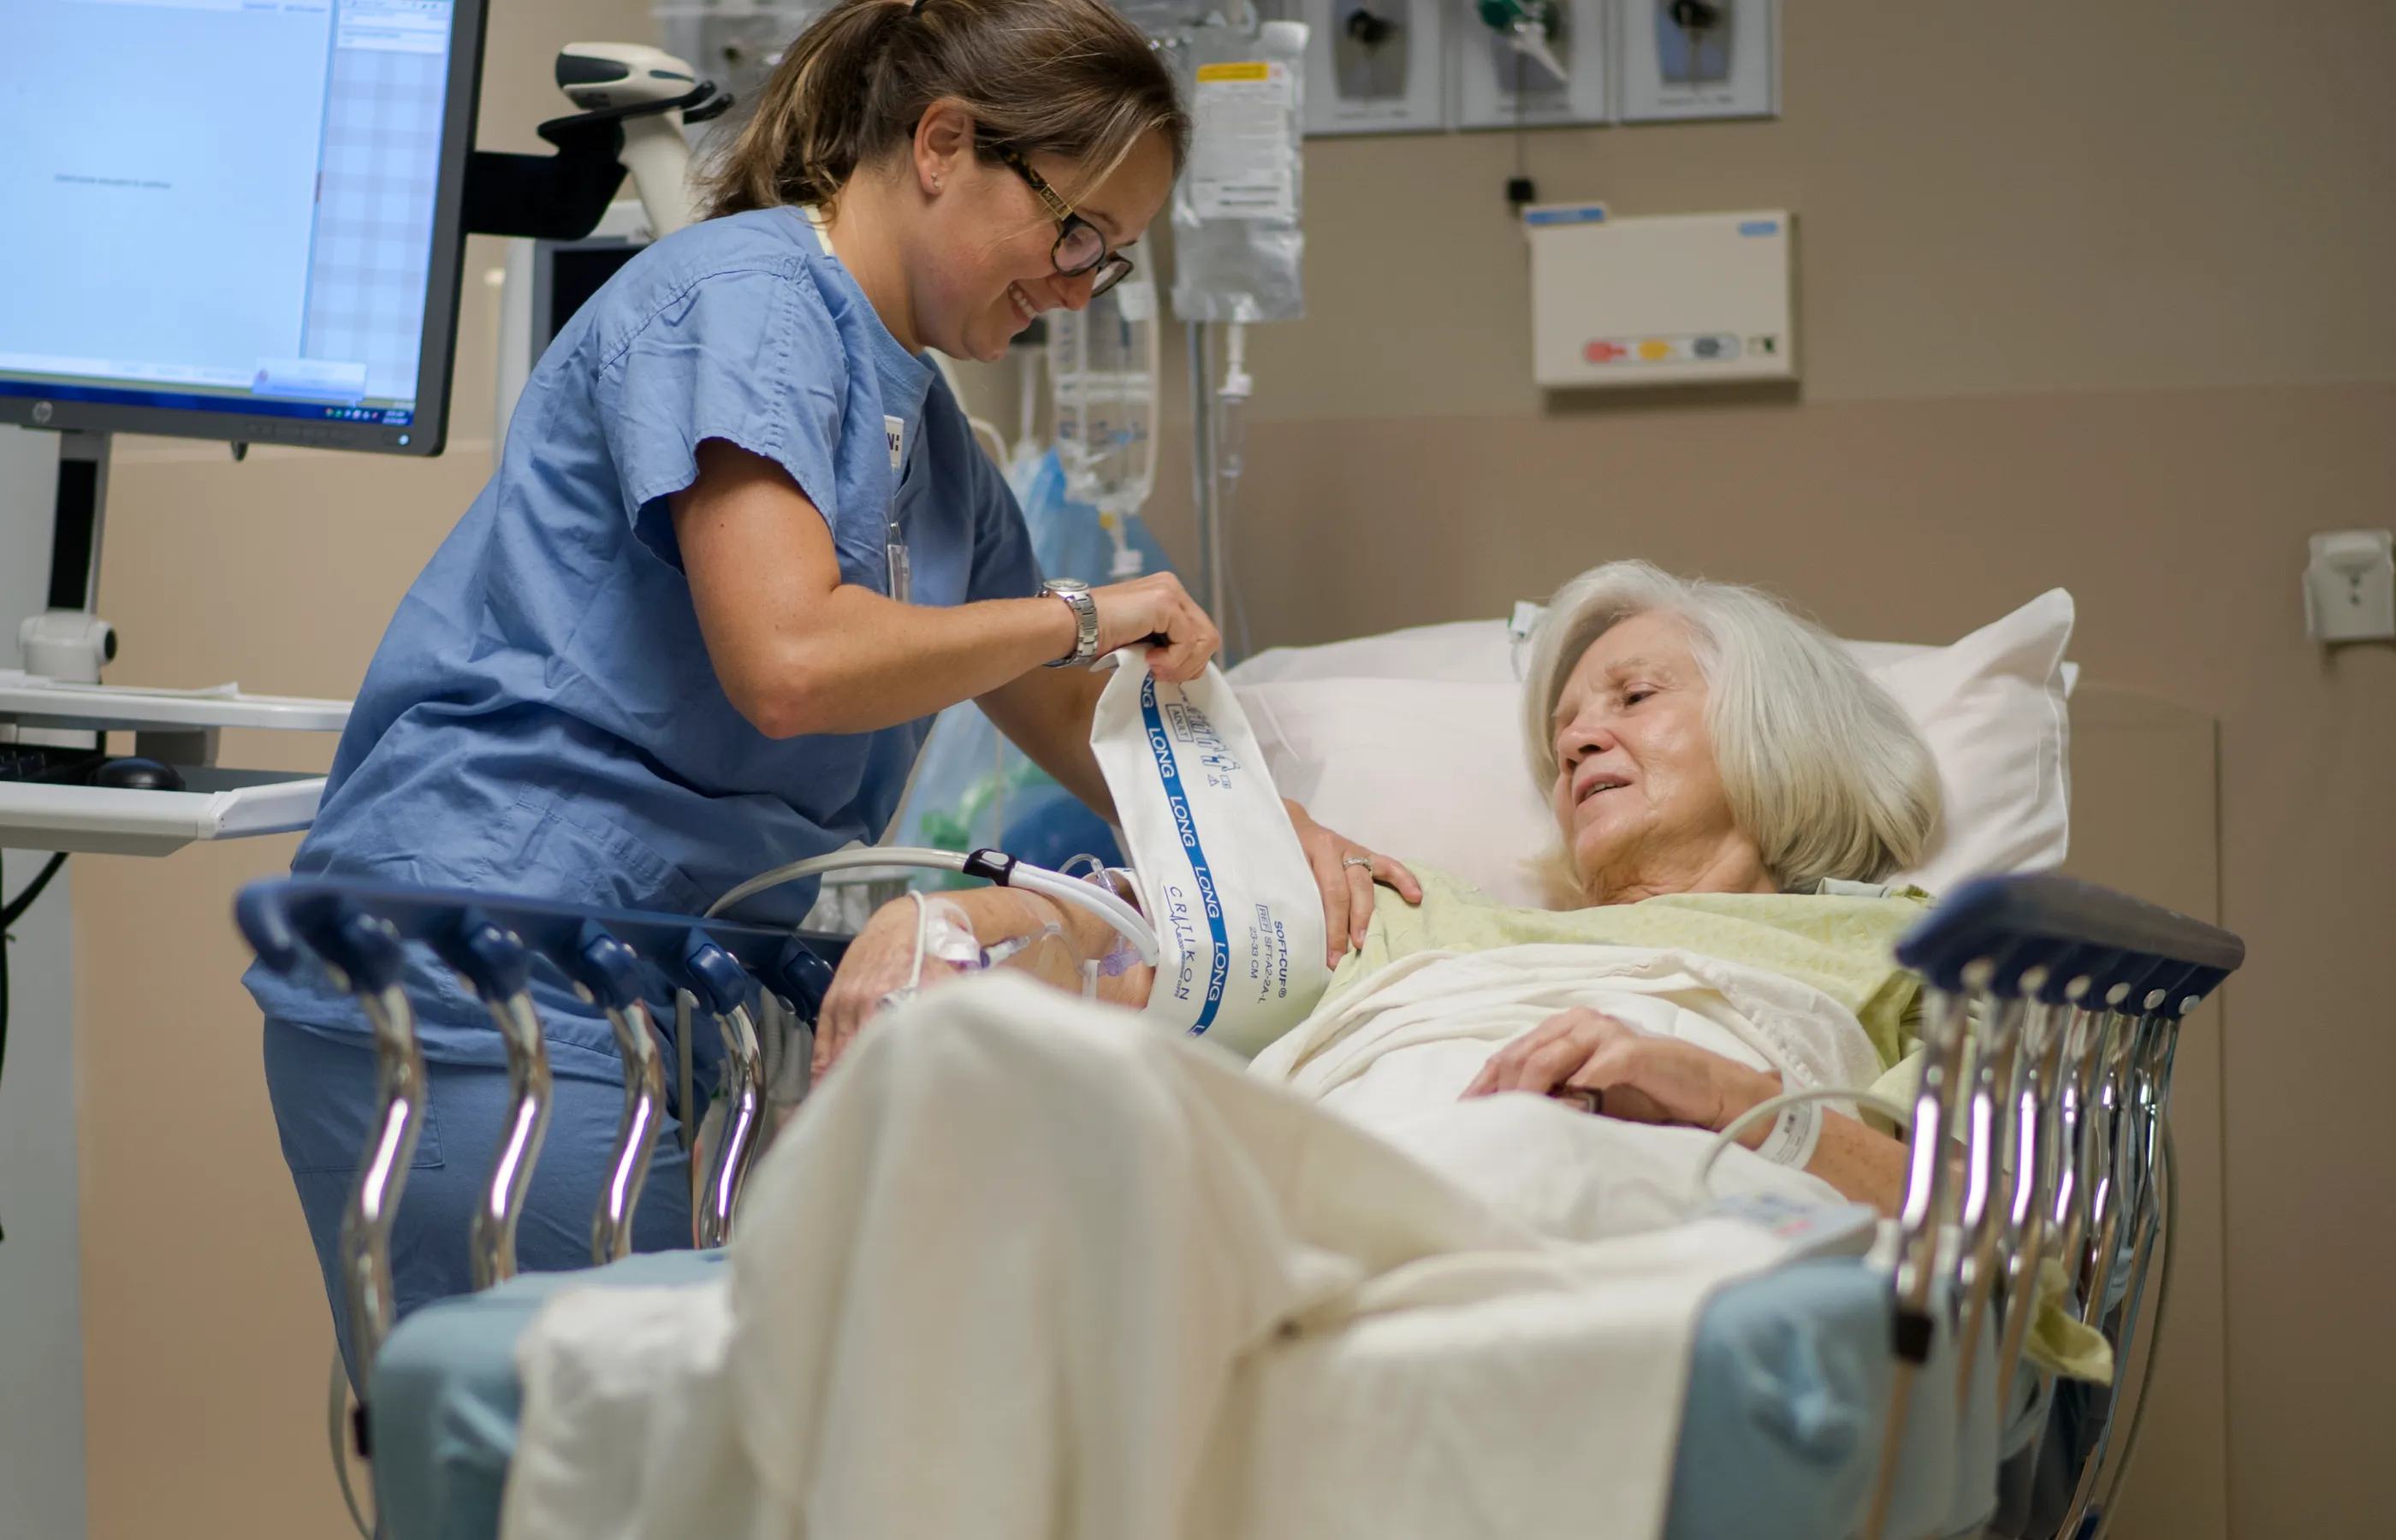 Nurse and patient are in the post-op area of the hospital. The patient is lying in bed, while the nurse wraps a blood pressure cuff around her arm.  